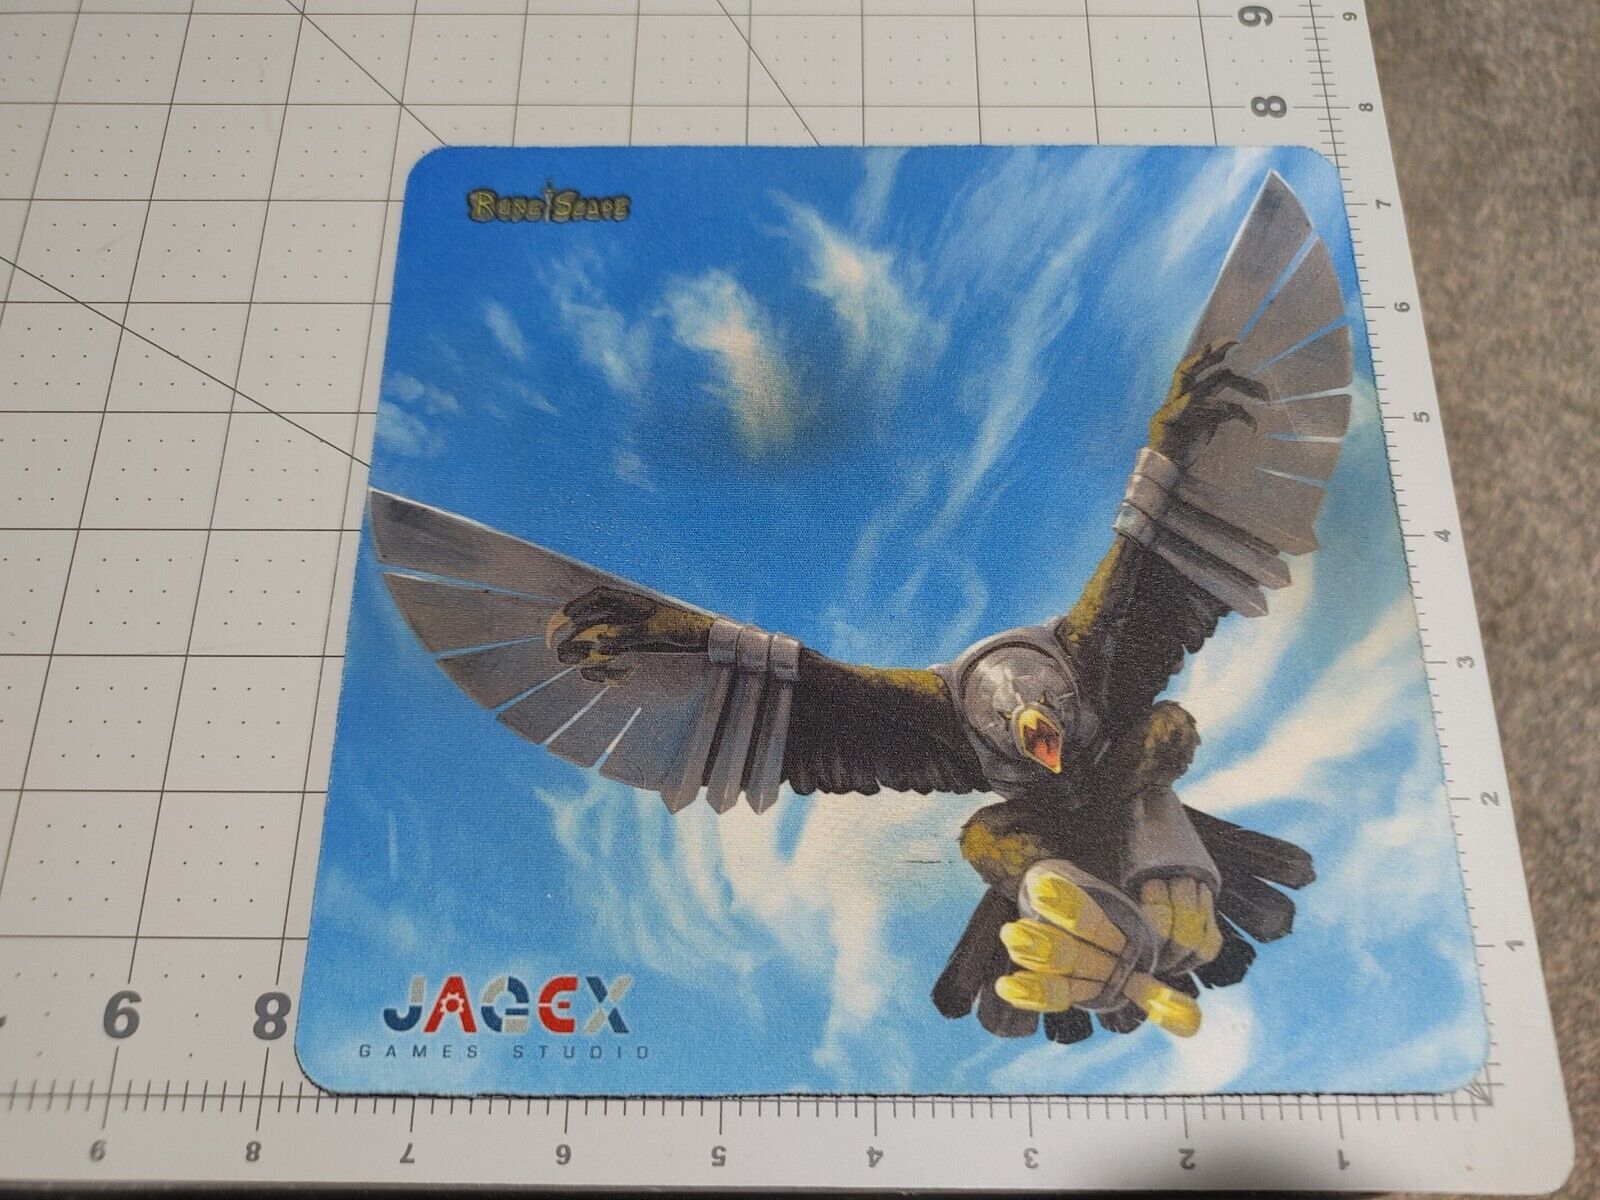 Official JAGEX Runescape Kree\'arra Mousepad, used with some wear and staining.